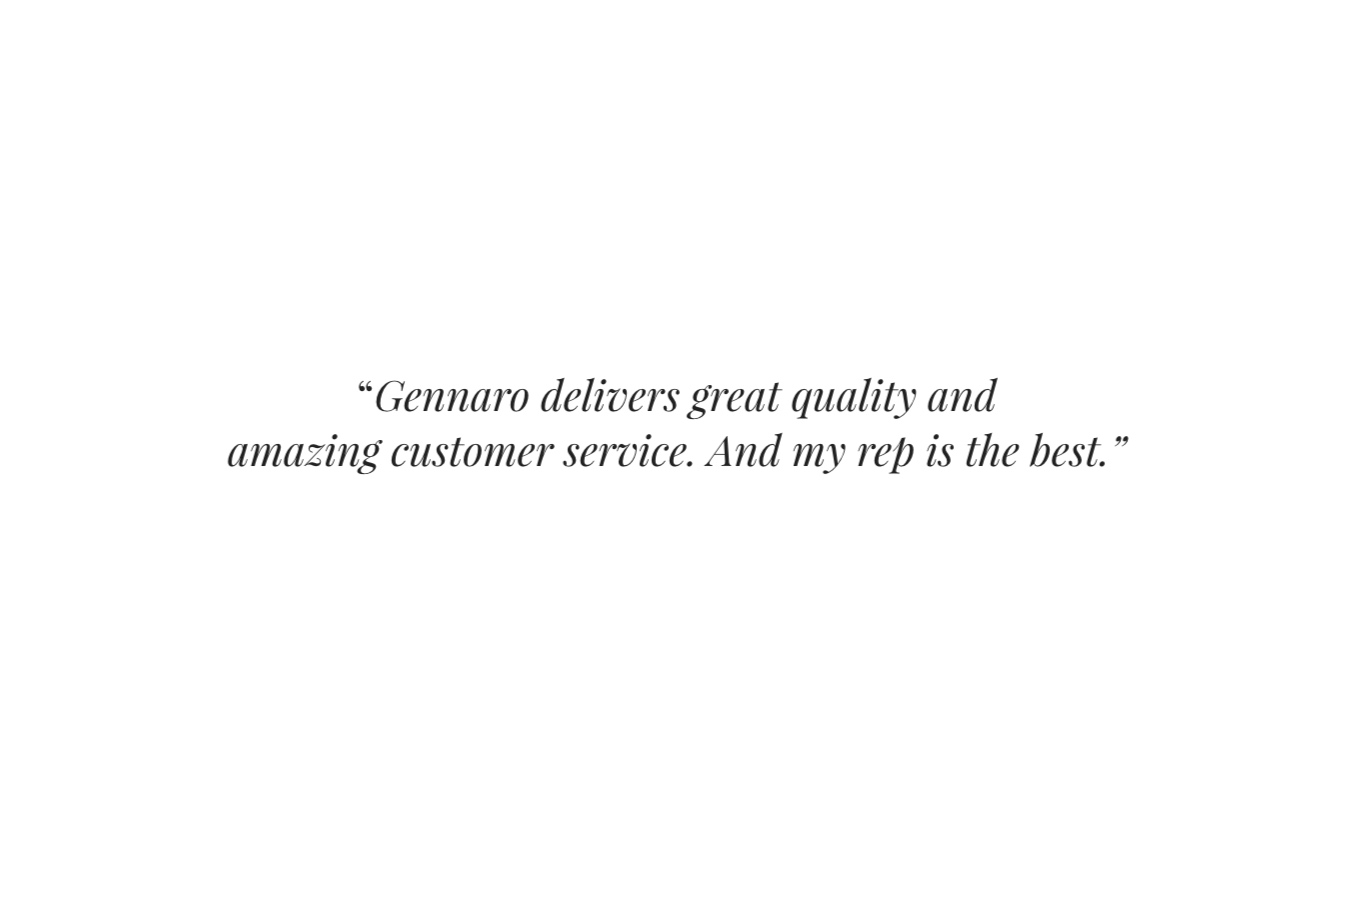  “ Gennaro delivers great quality and amazing customer service. And my rep is the best.”     